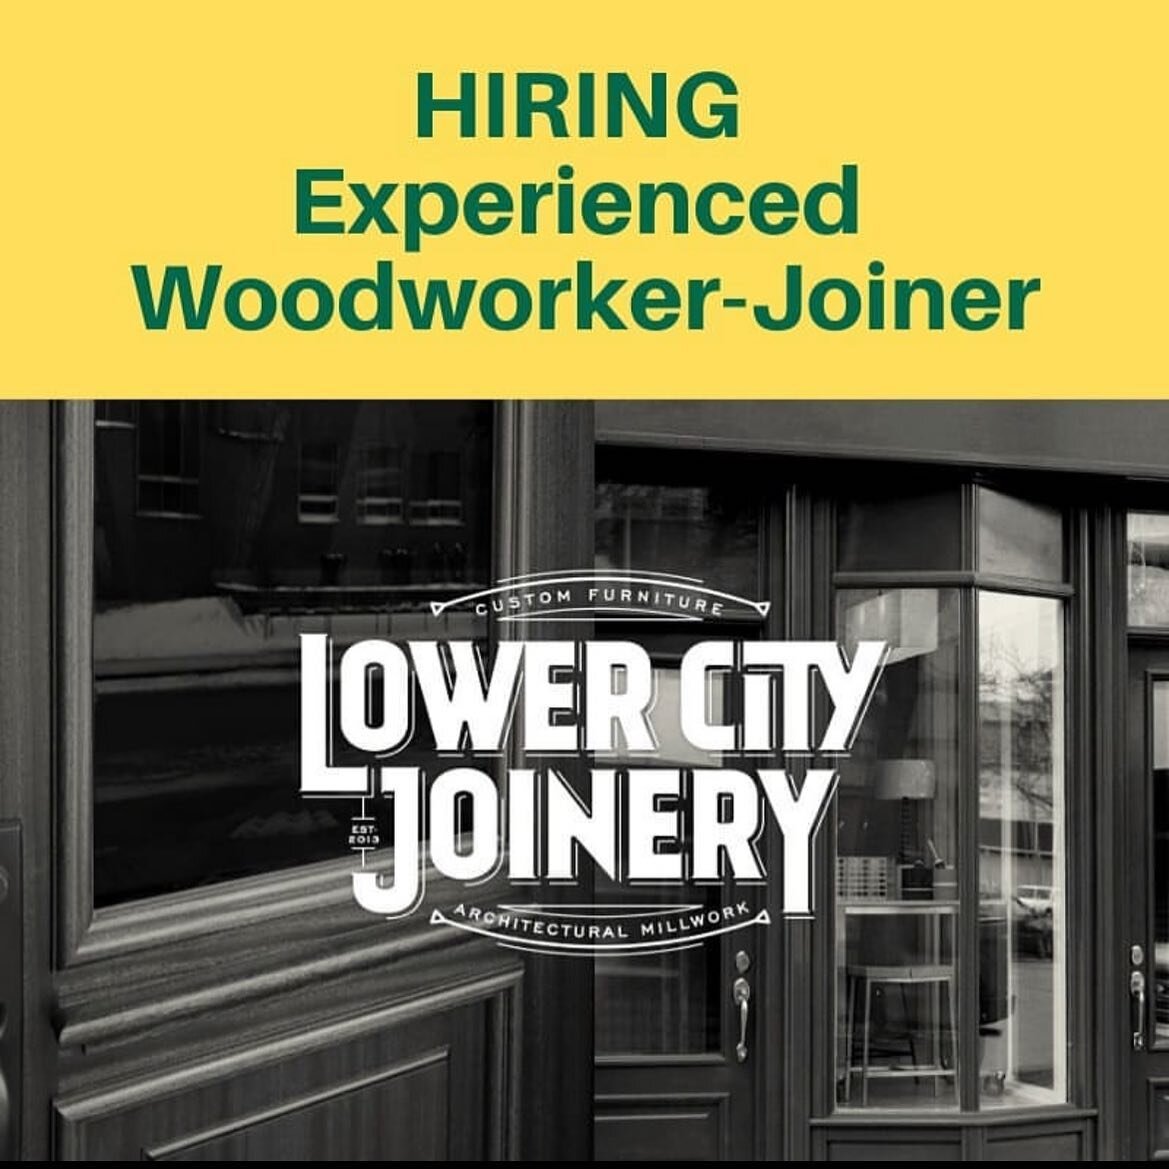 We&rsquo;re hiring! If you are a skilled woodworker get in touch via the link in our profile.

#doorsofhamont #doorsofinstagram #wooddoor #woodendoor #woodworker #historichomes #finefinishes  #restore #rebuild #custommillwork #homedesign #architectur